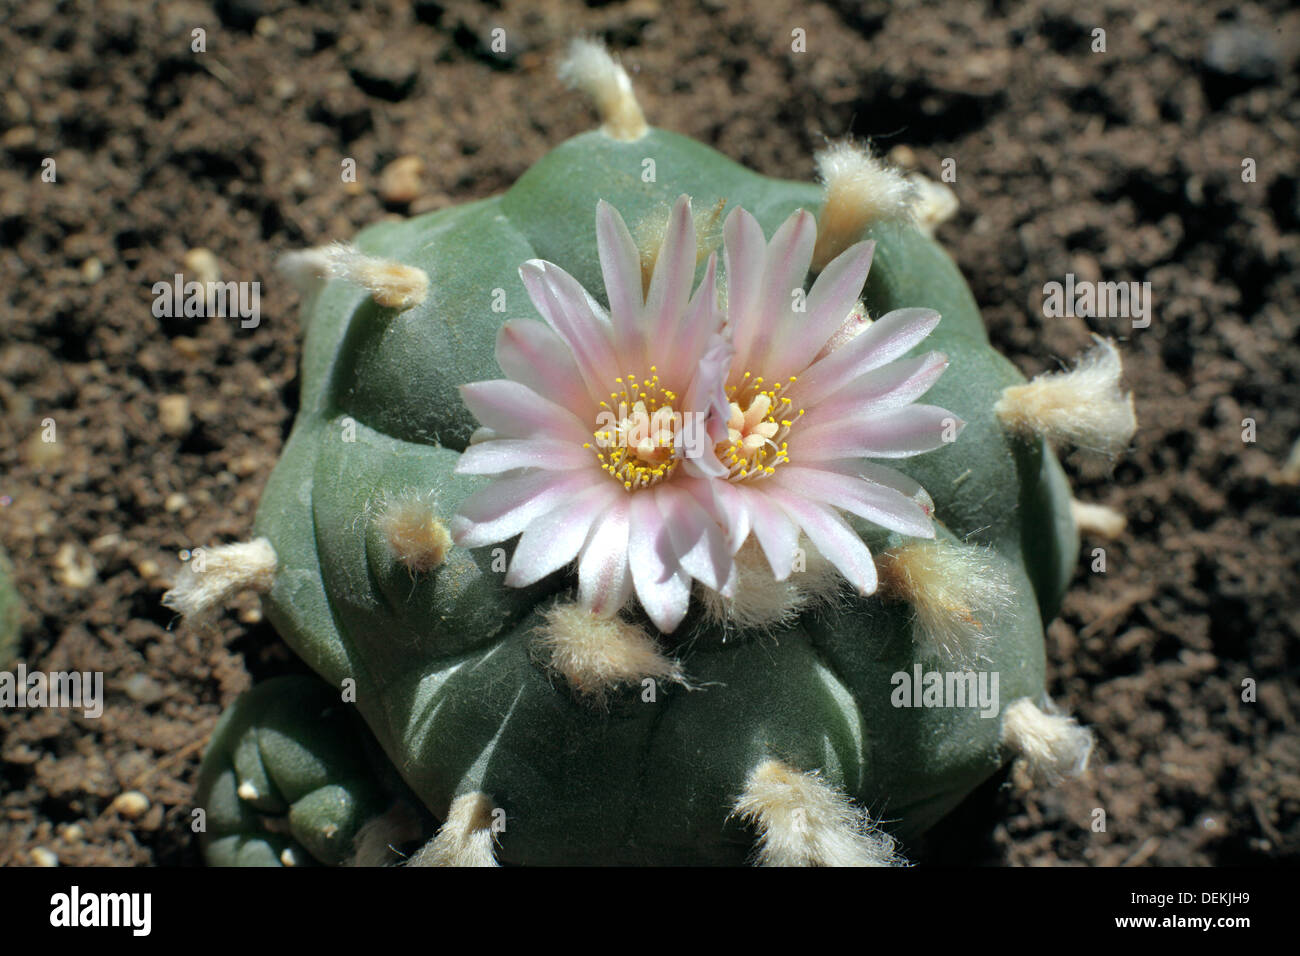 A peyote cactus with two flowers blooming at once. Stock Photo